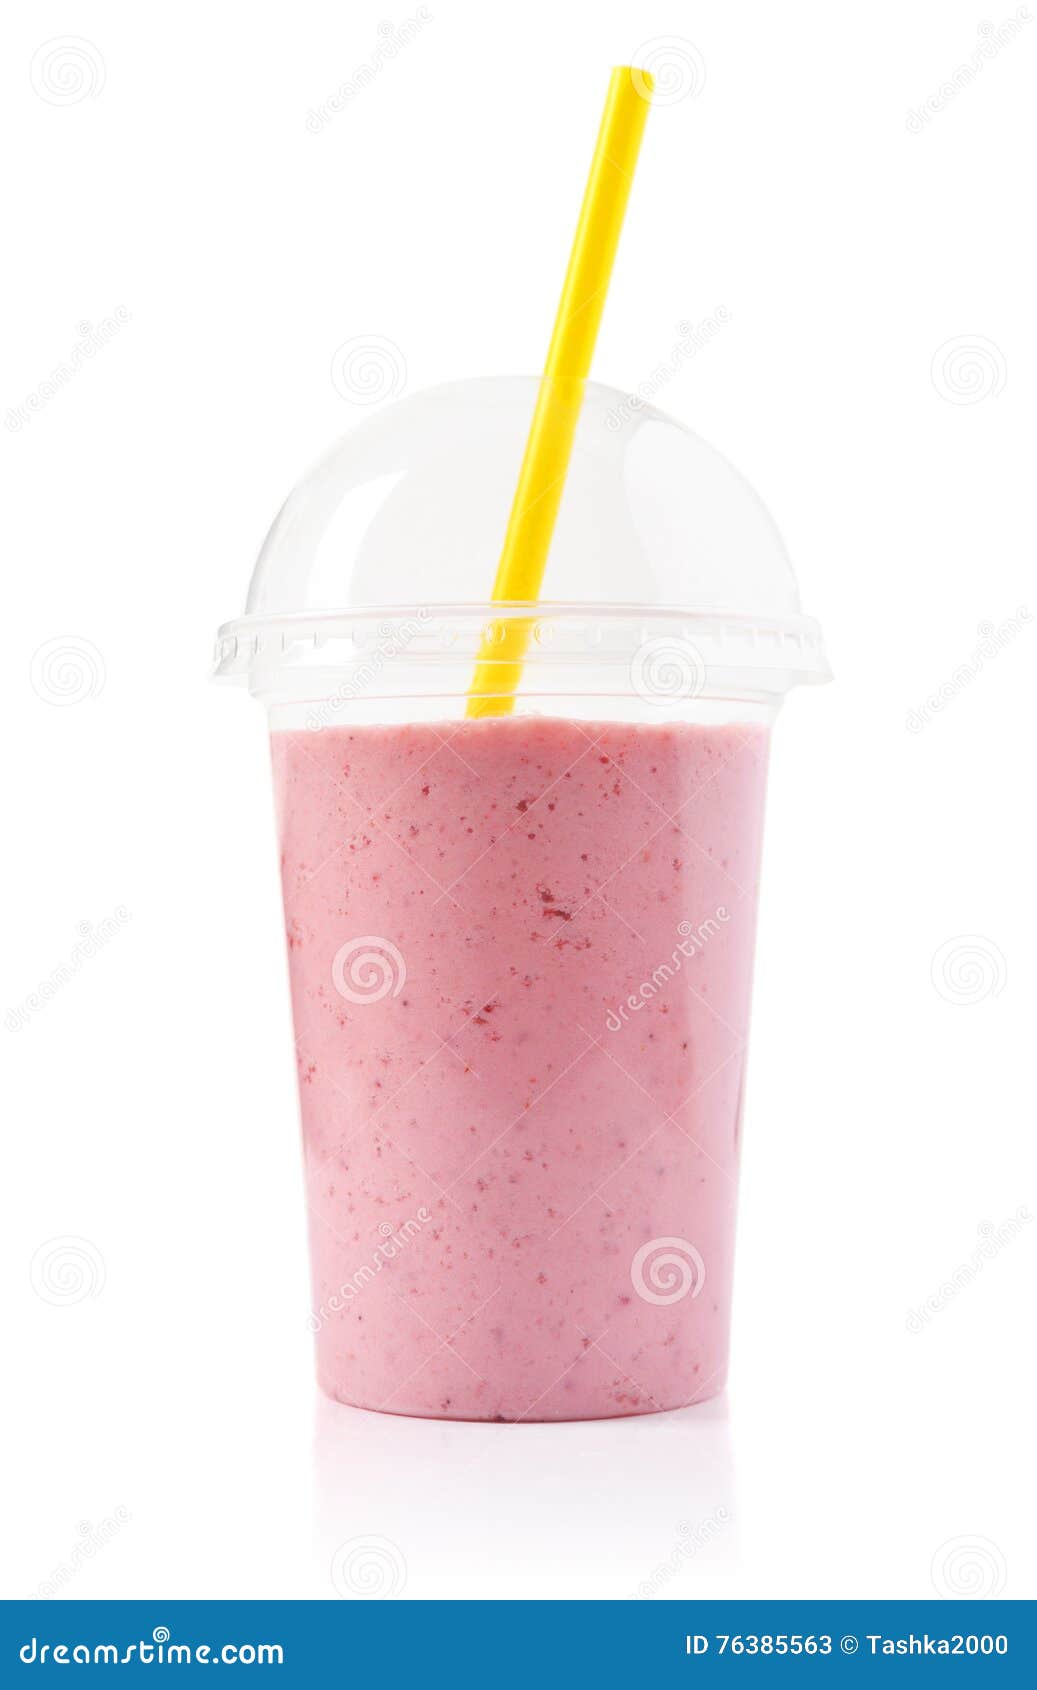 Download 51 Strawberry Smoothie Plastic Transparent Cup Photos Free Royalty Free Stock Photos From Dreamstime Yellowimages Mockups